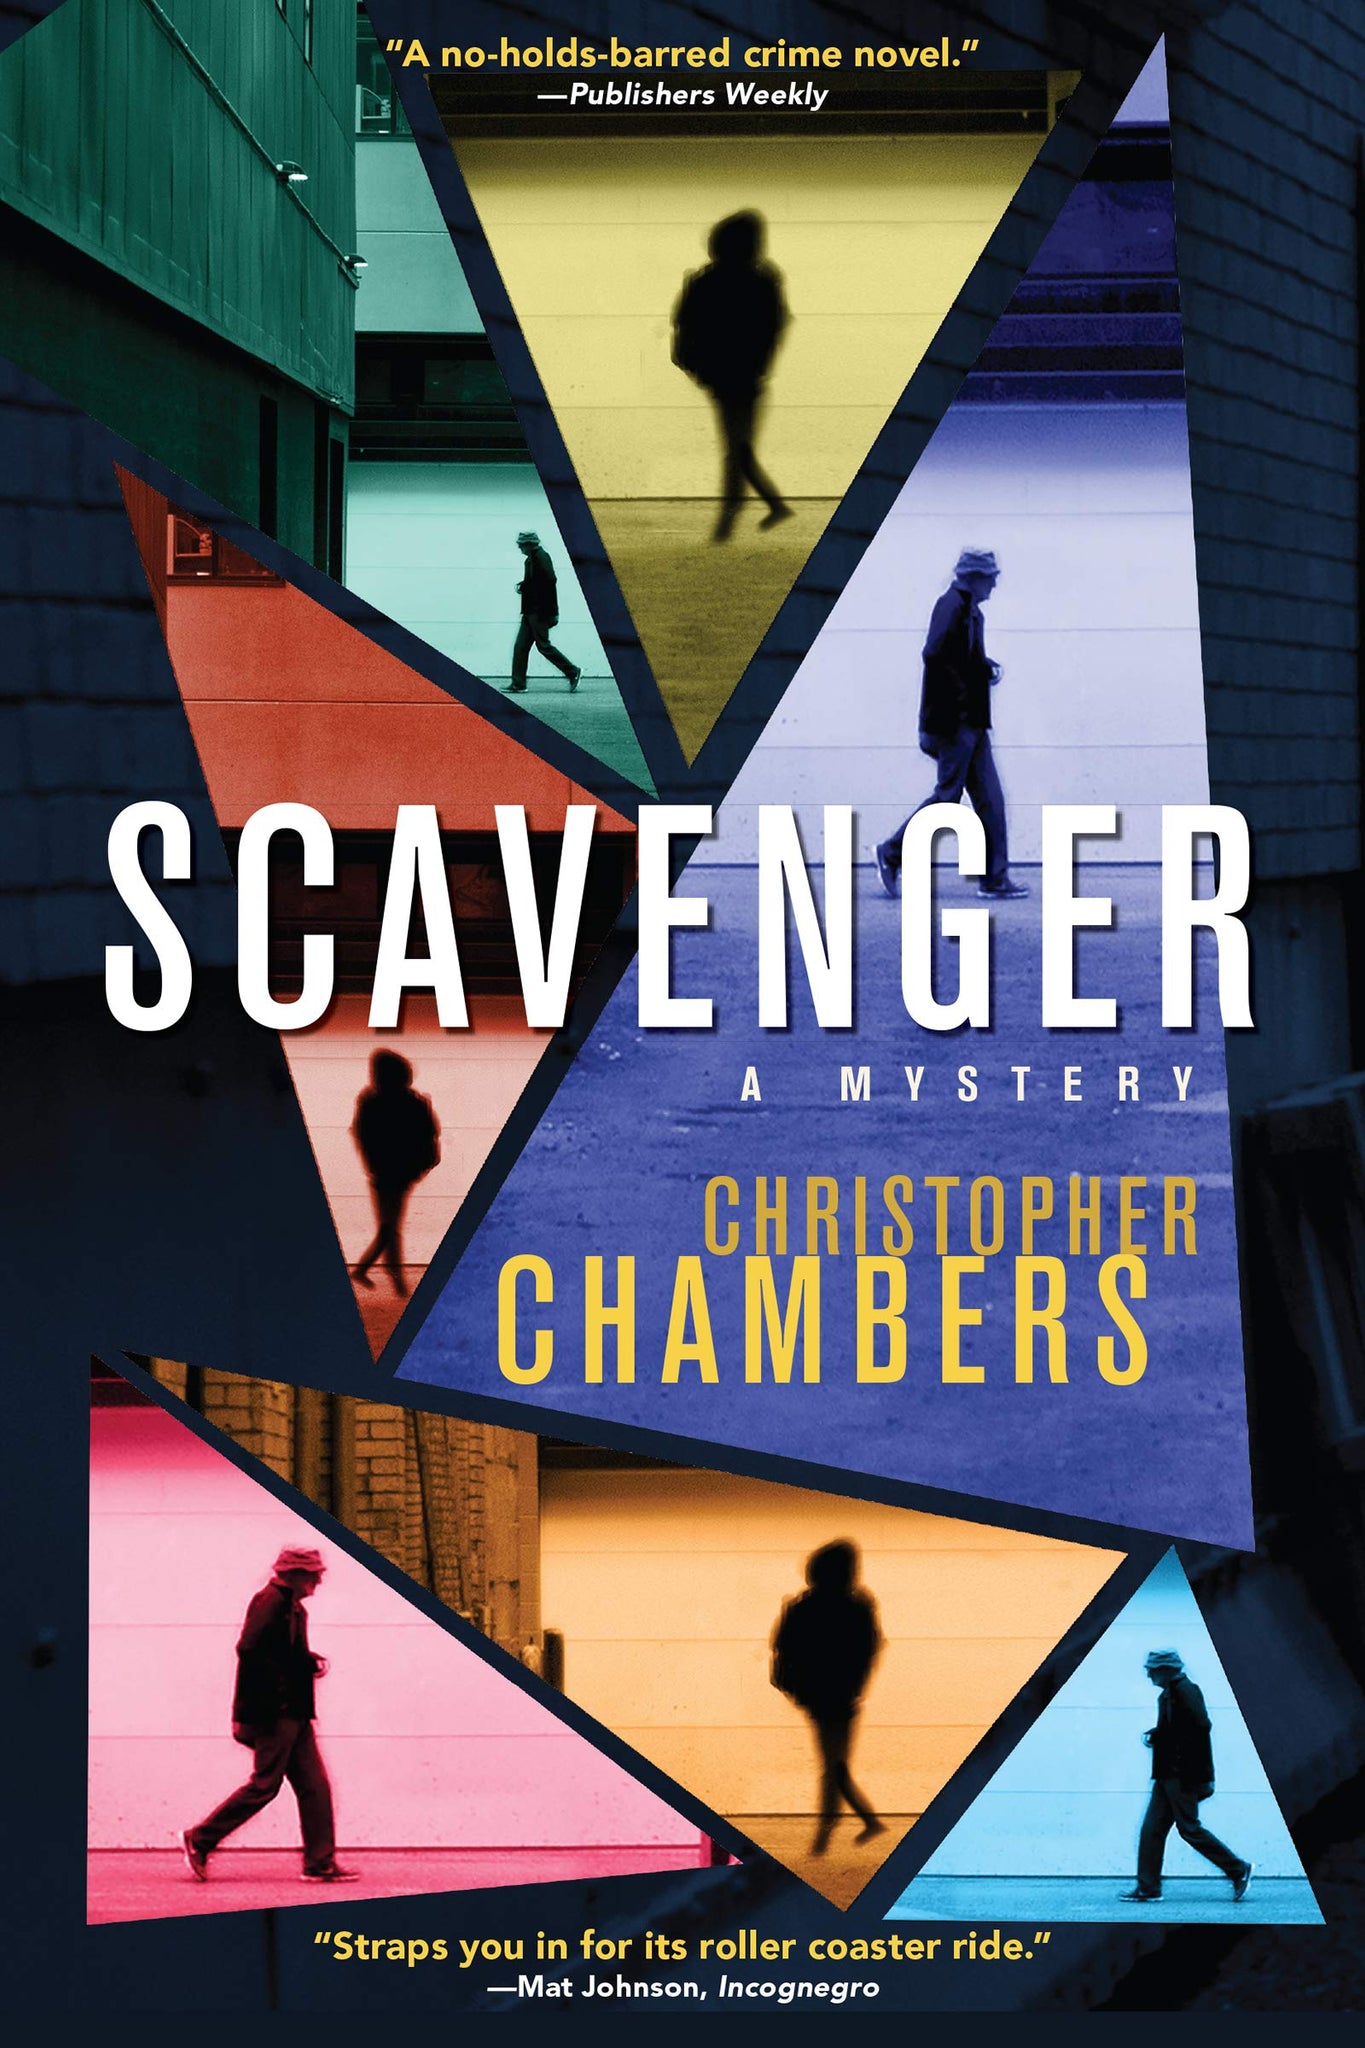 Scavenger: A Mystery by Christopher Chambers